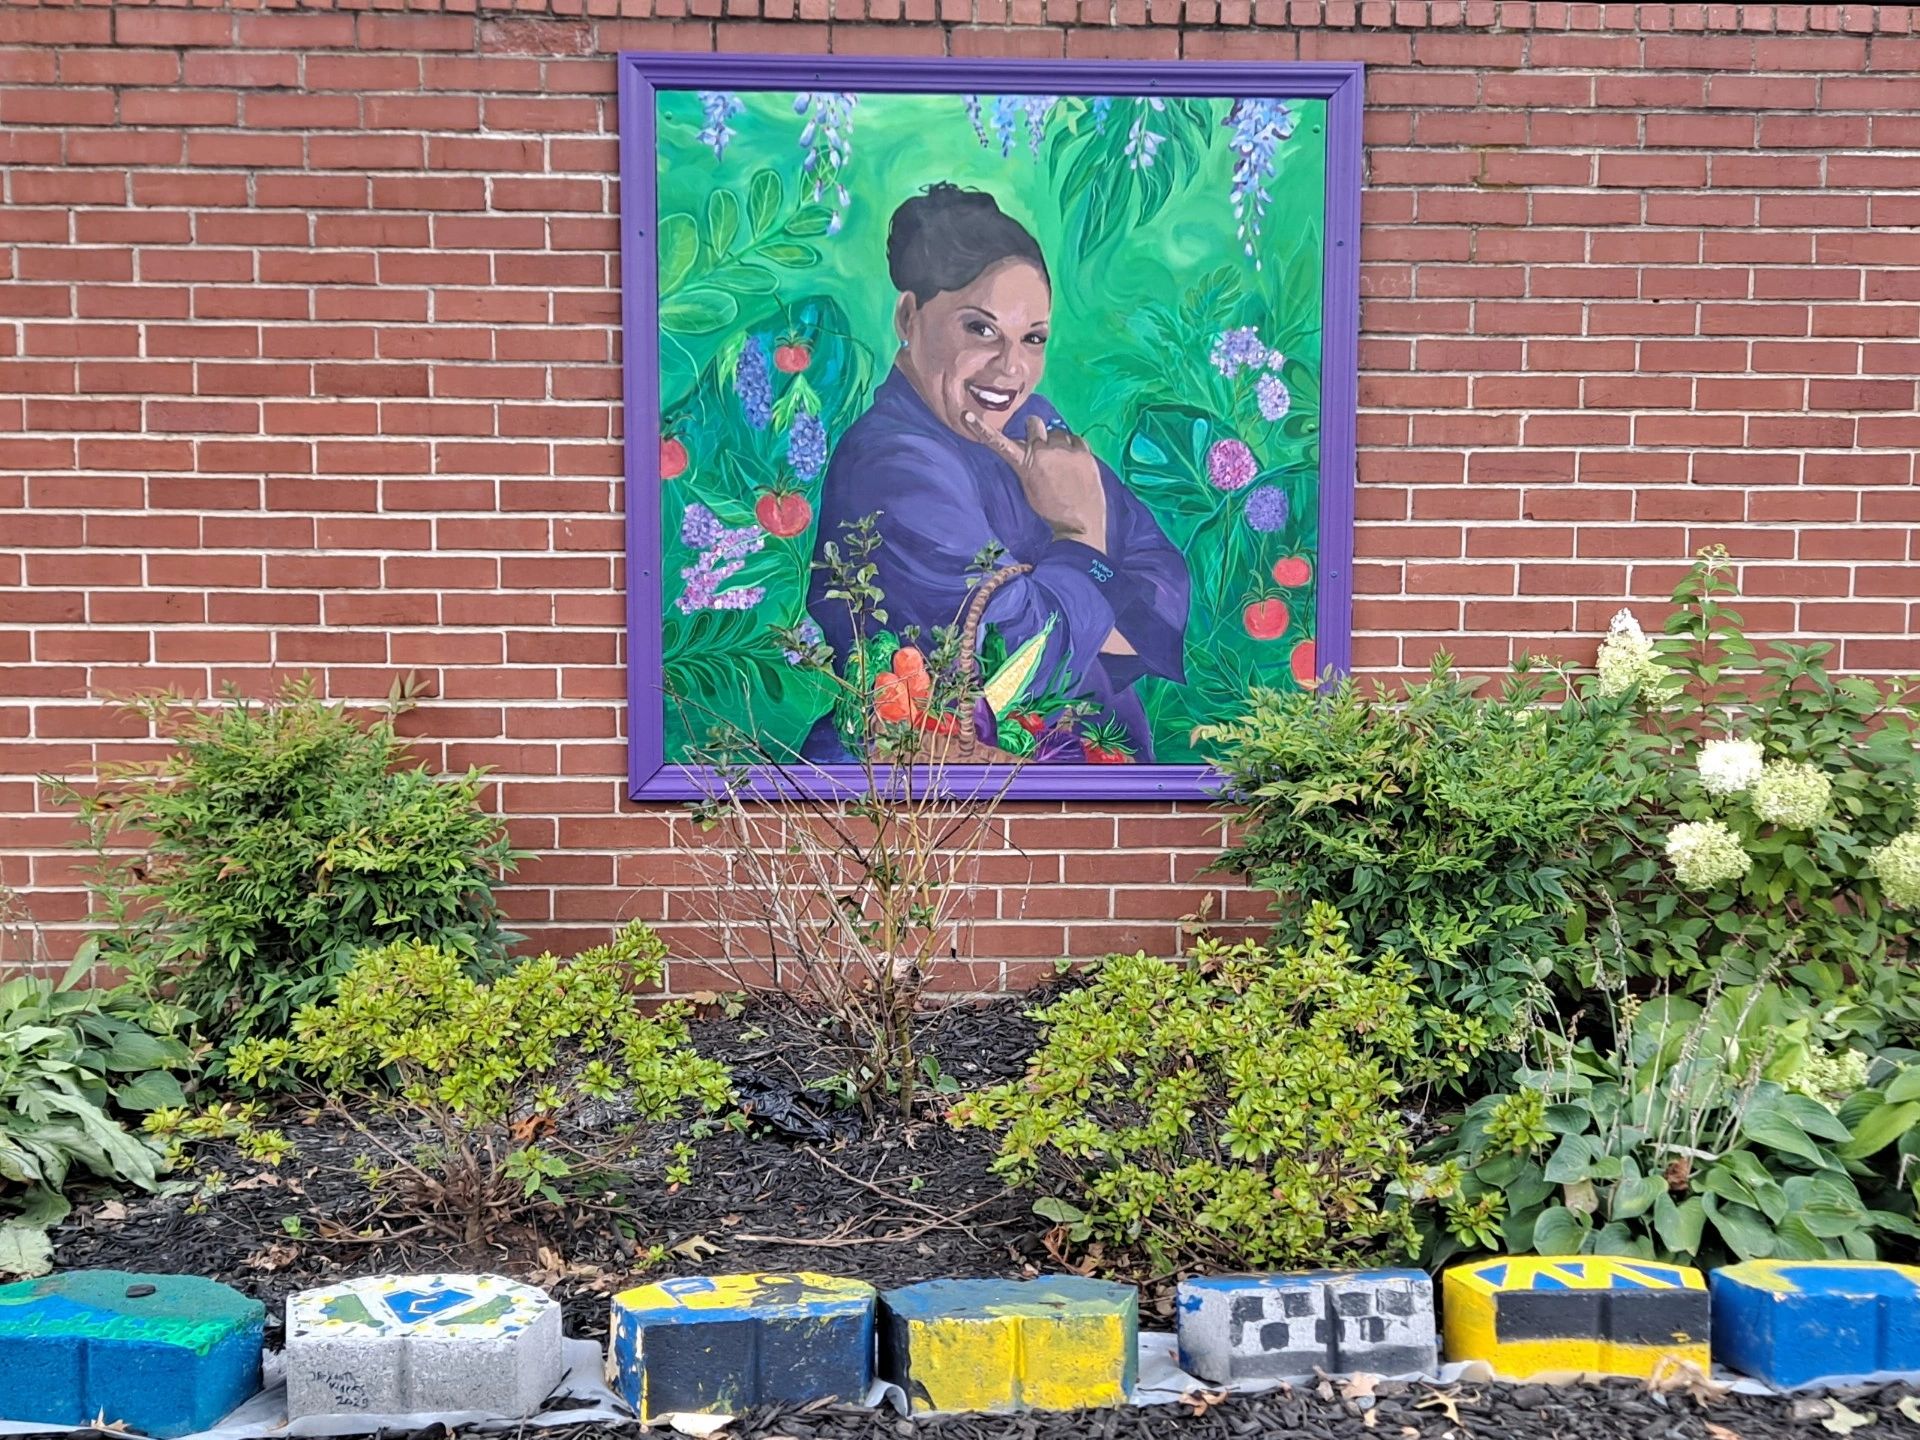 Liberty Village Project's Chef Connie Memorial Garden located at 3901 Maine Ave, Baltimore, MD 21207